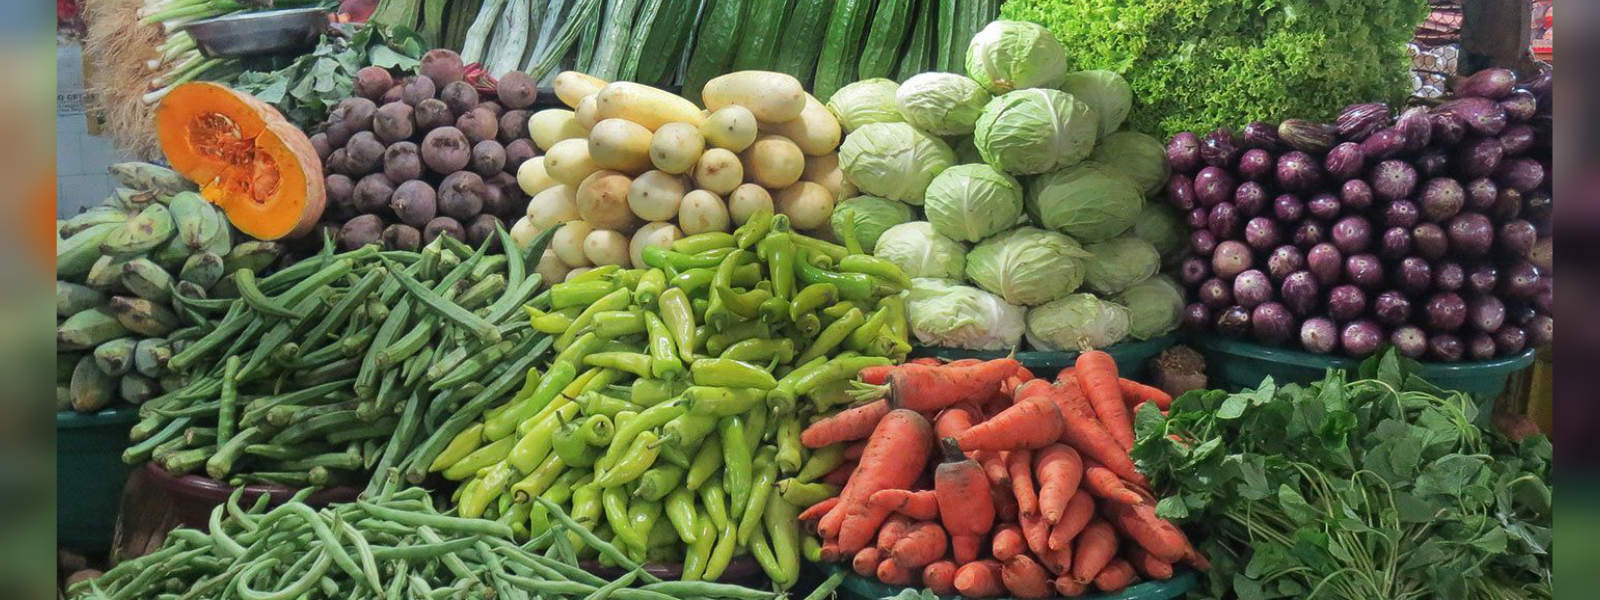 Vegetable prices have increased by 400%